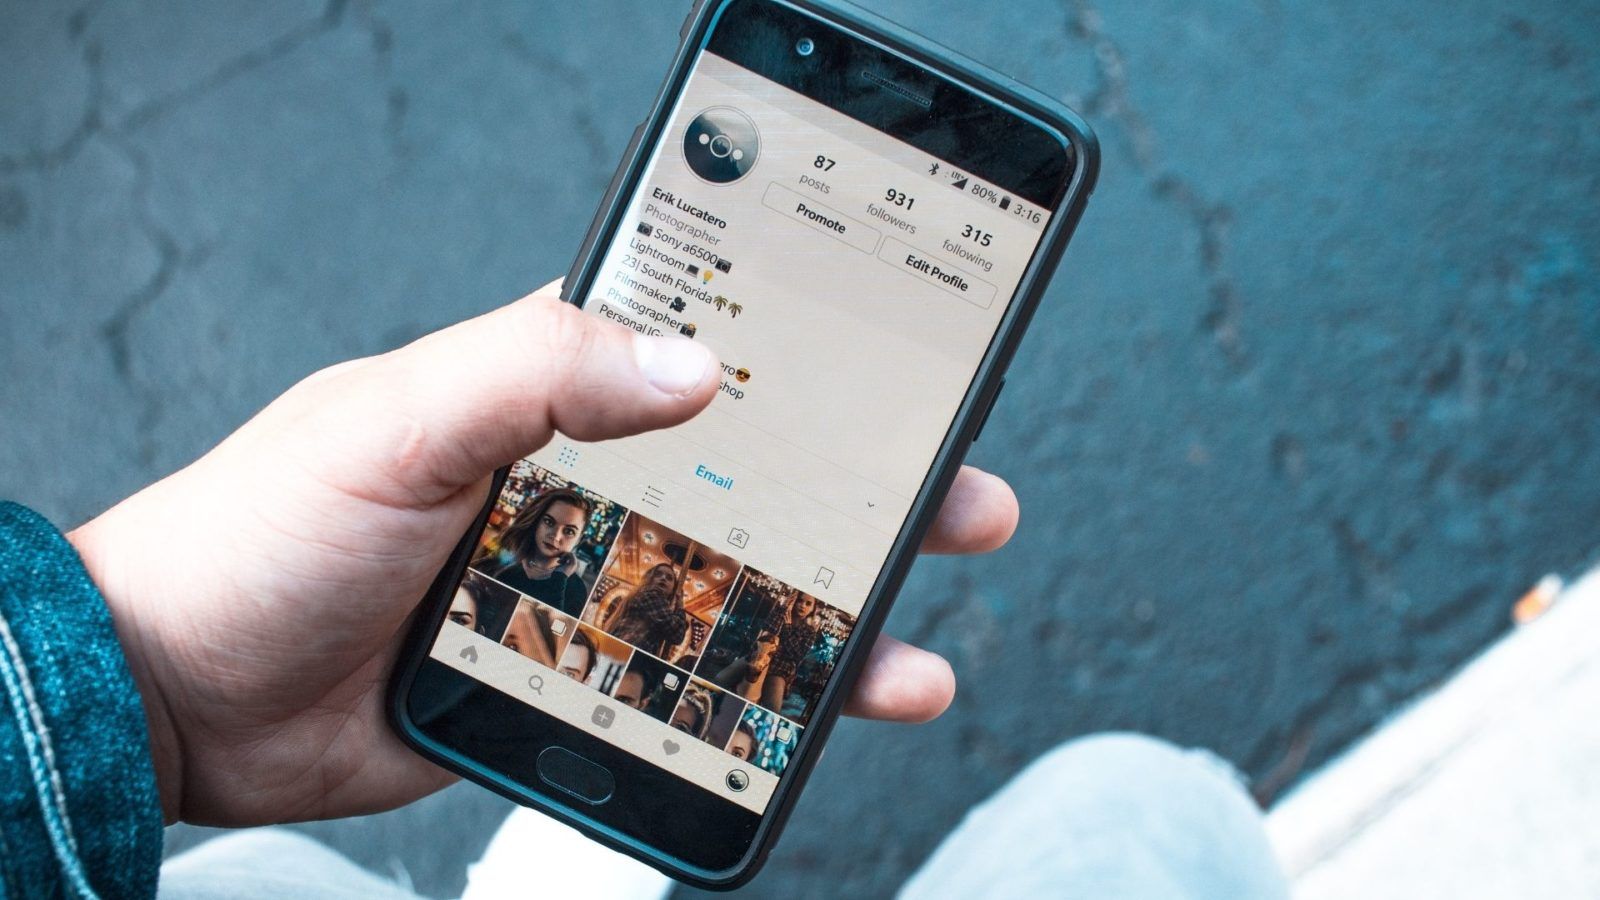 Instagram features and updates that you might have missed